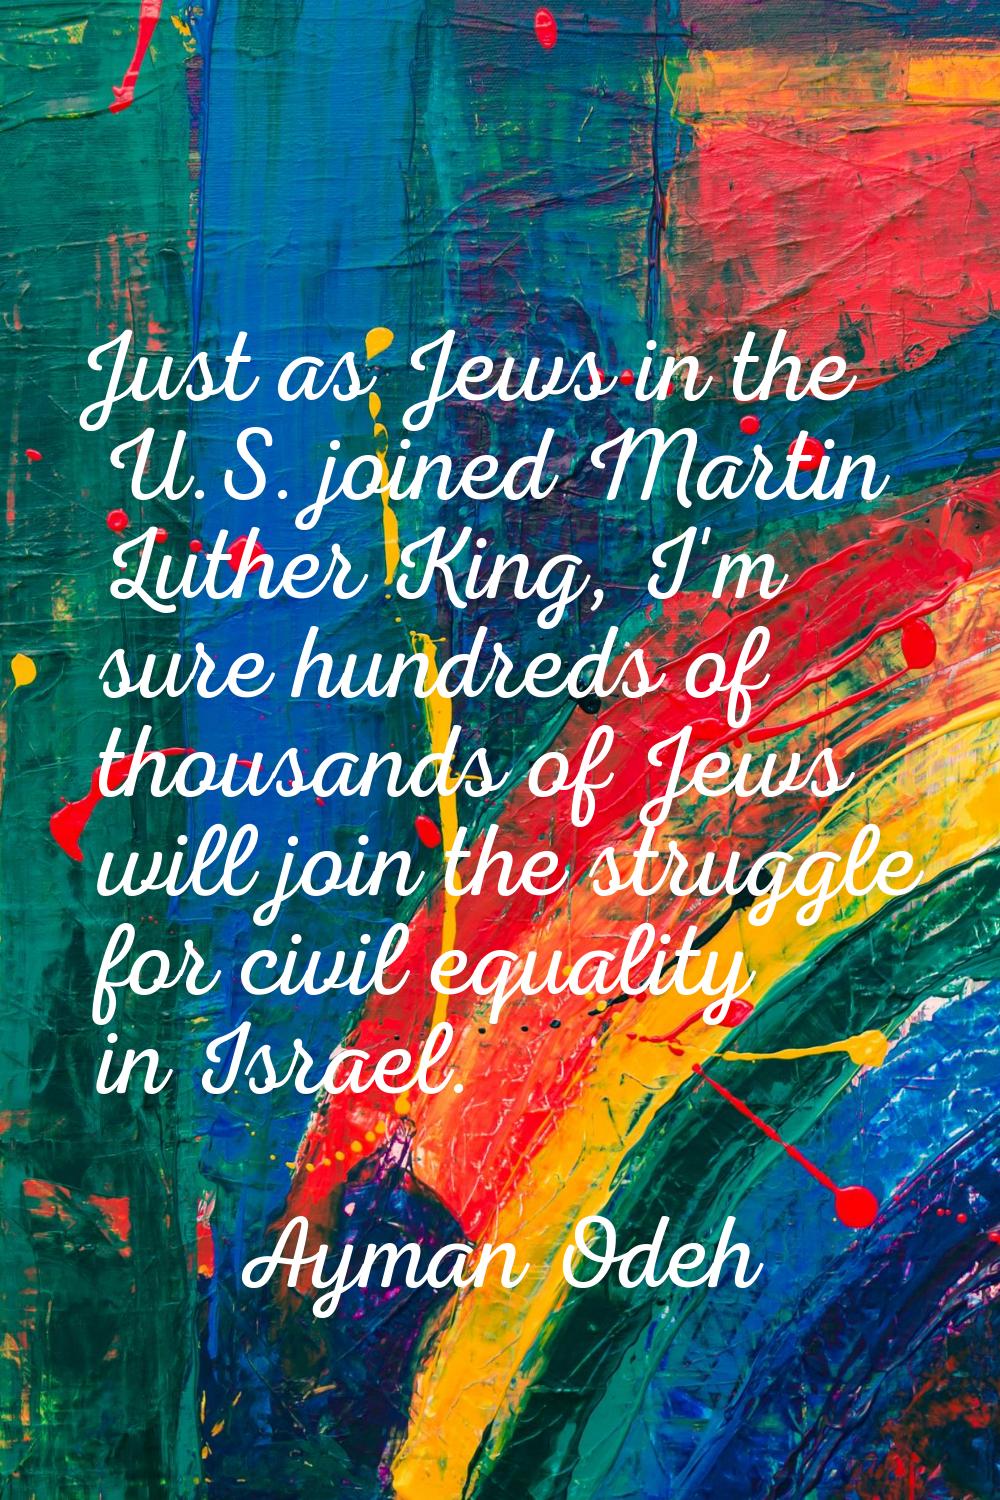 Just as Jews in the U.S. joined Martin Luther King, I'm sure hundreds of thousands of Jews will joi